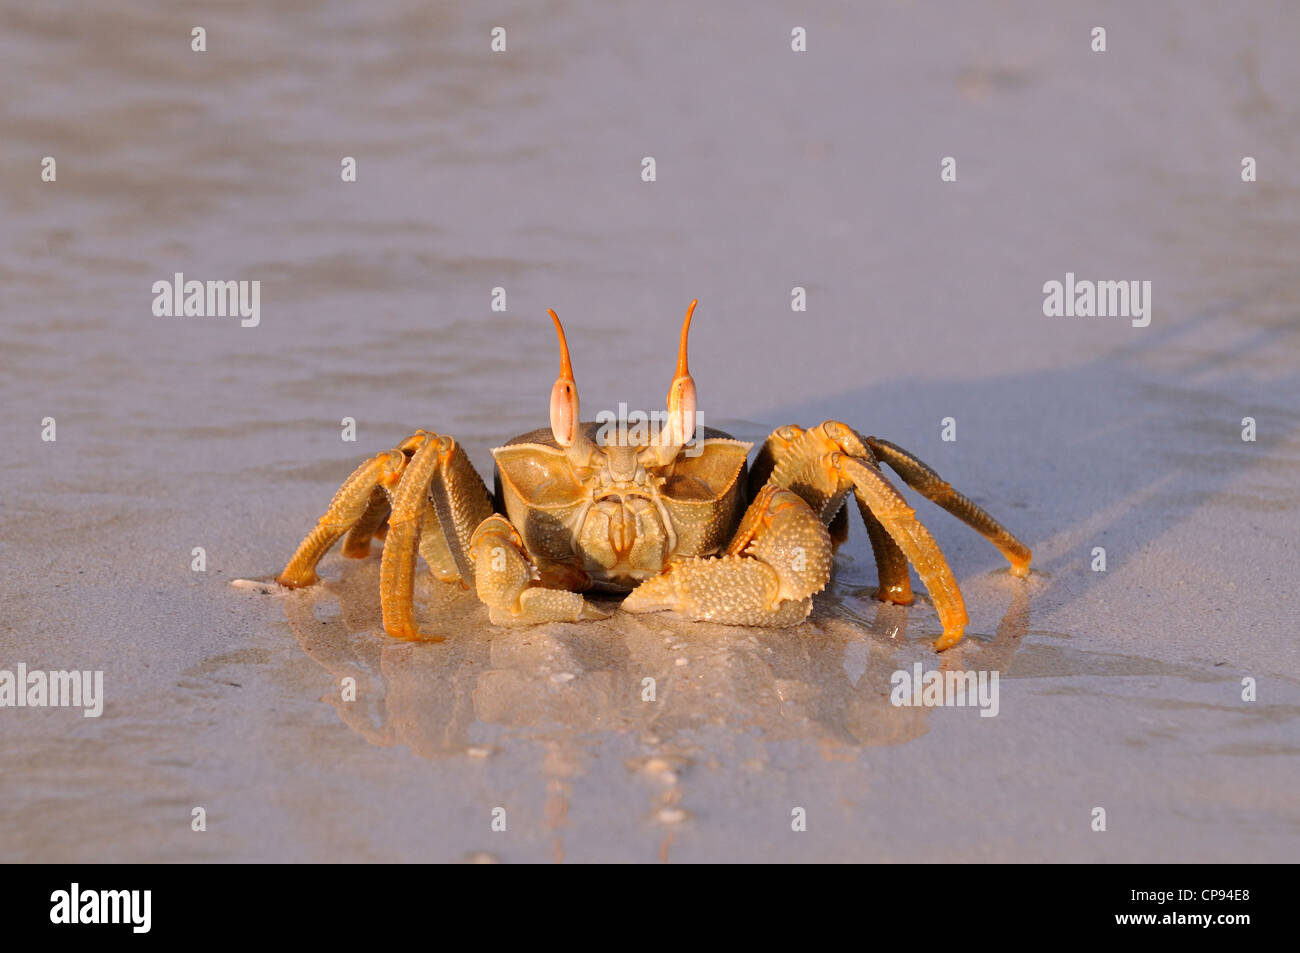 Horned or Horn-eyed Ghost Crab (Ocypode ceratophthalmus) on sea shore, The Maldives Stock Photo